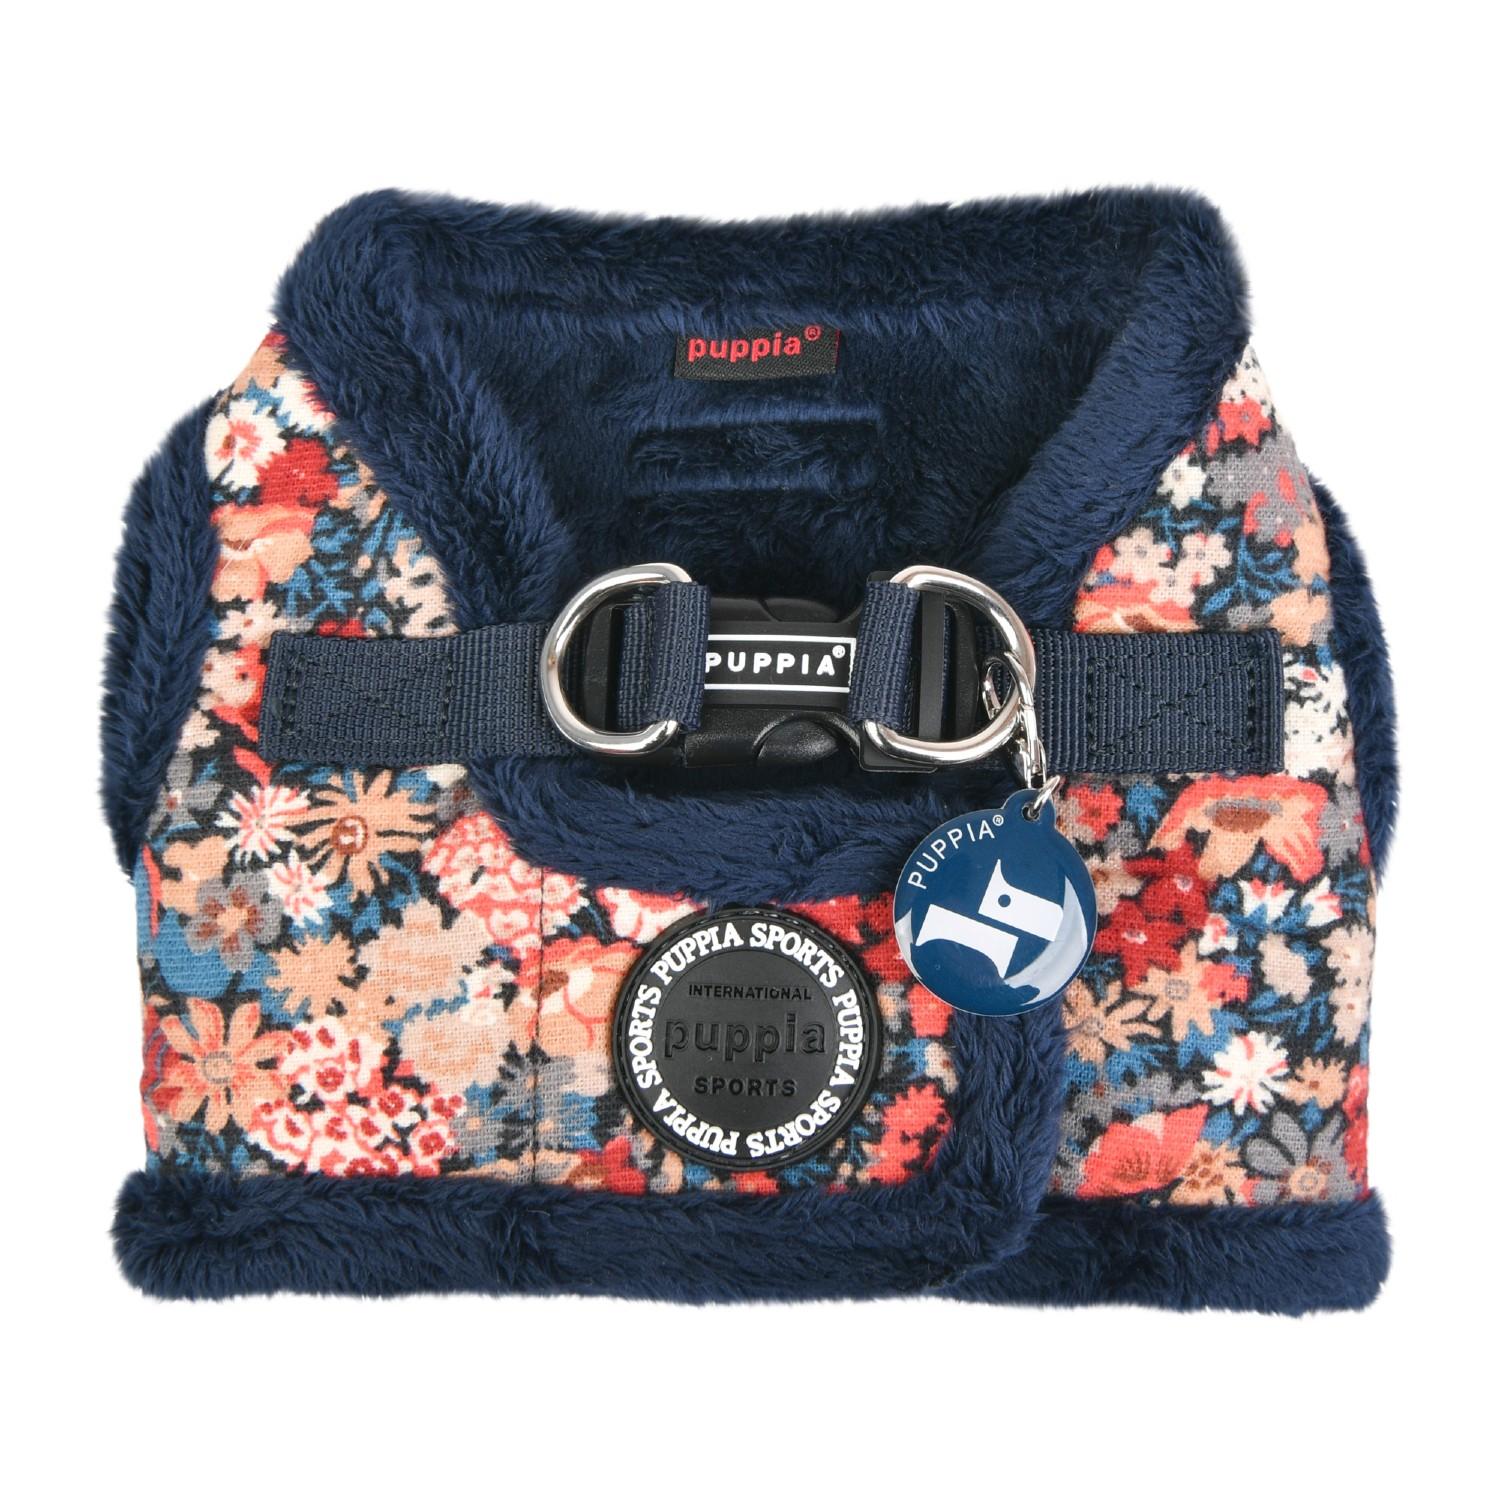 Gianni Vest Dog Harness by Puppia - Navy